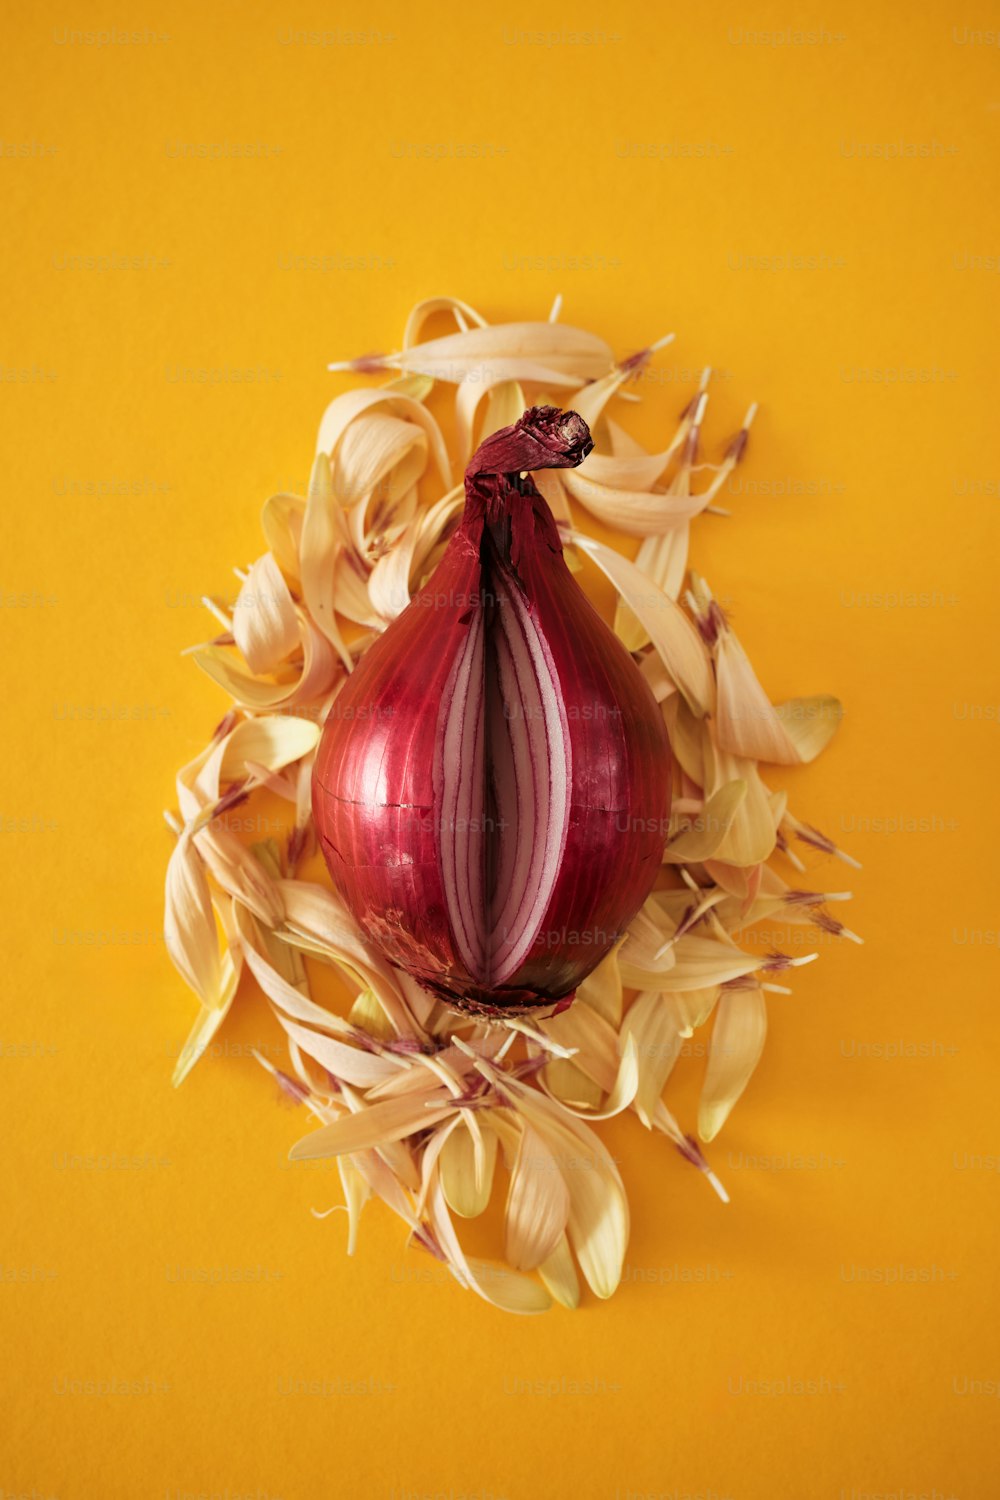 a red onion on a yellow background